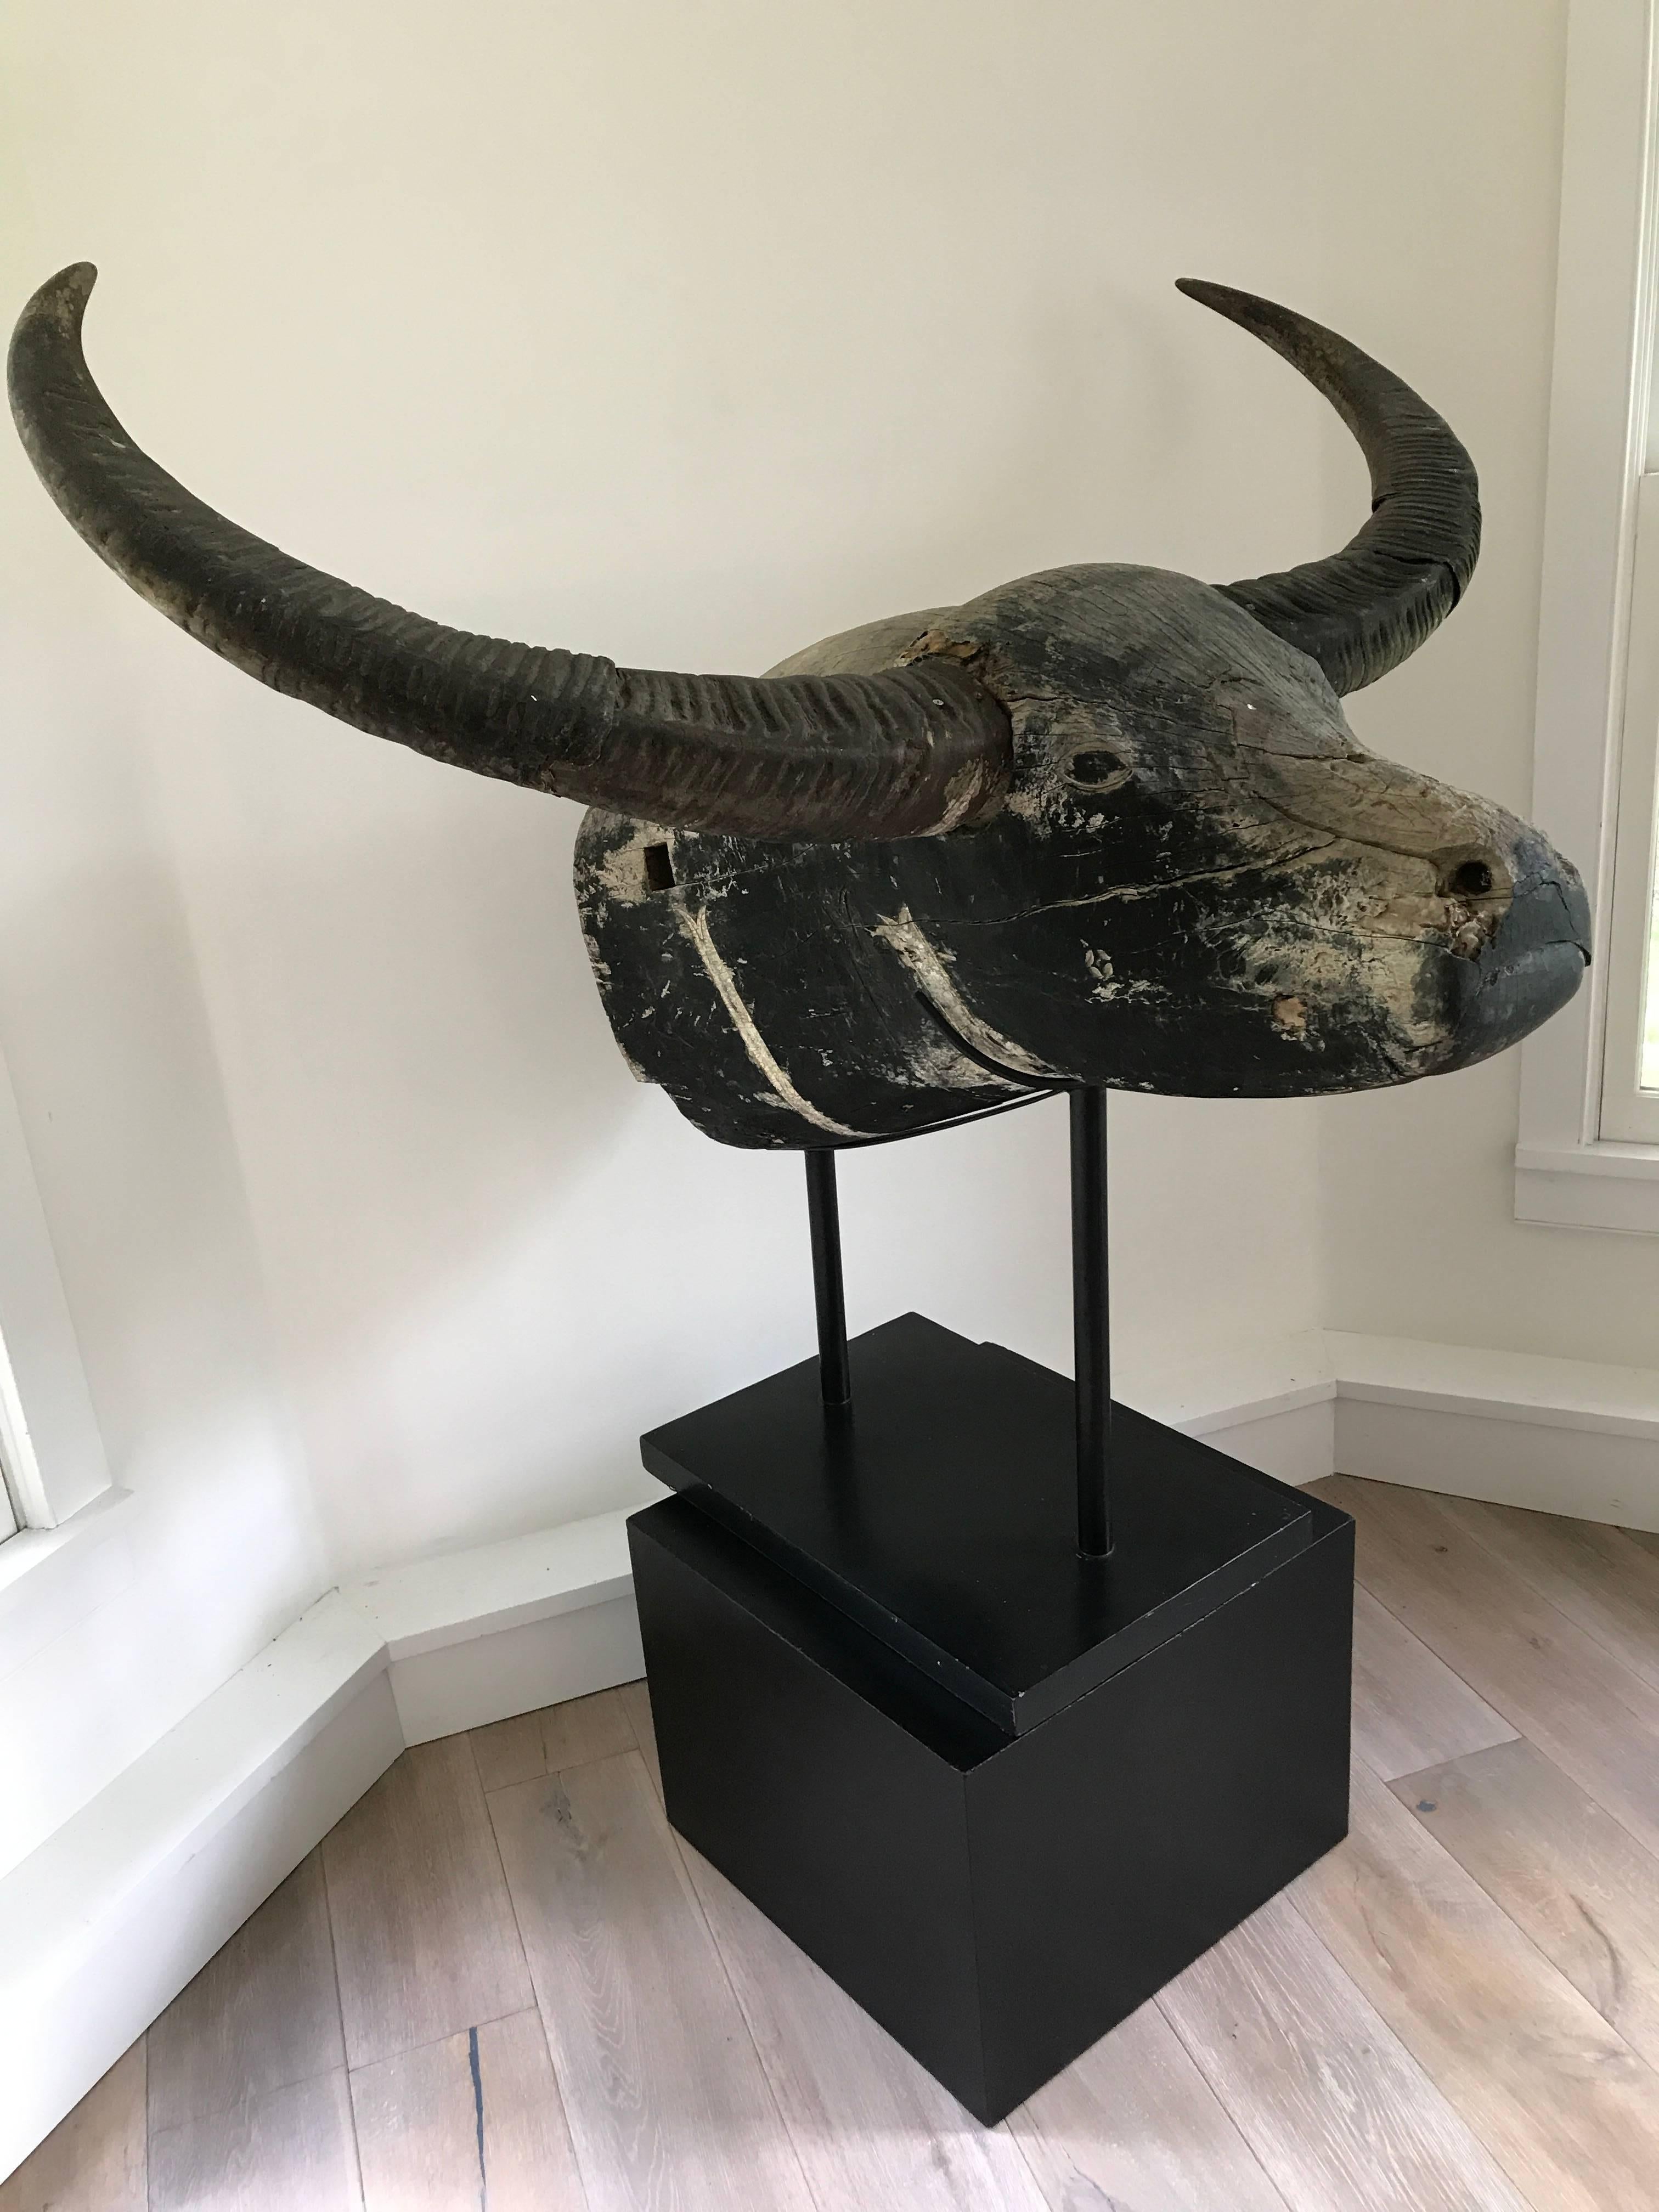 Massive and rare early 19th century Indonesian ship bowsprit. Originally a decoration on the front of a ship. Carved wood bull with natural horns. Museum mounted base. Square pedestal for display purposes only.